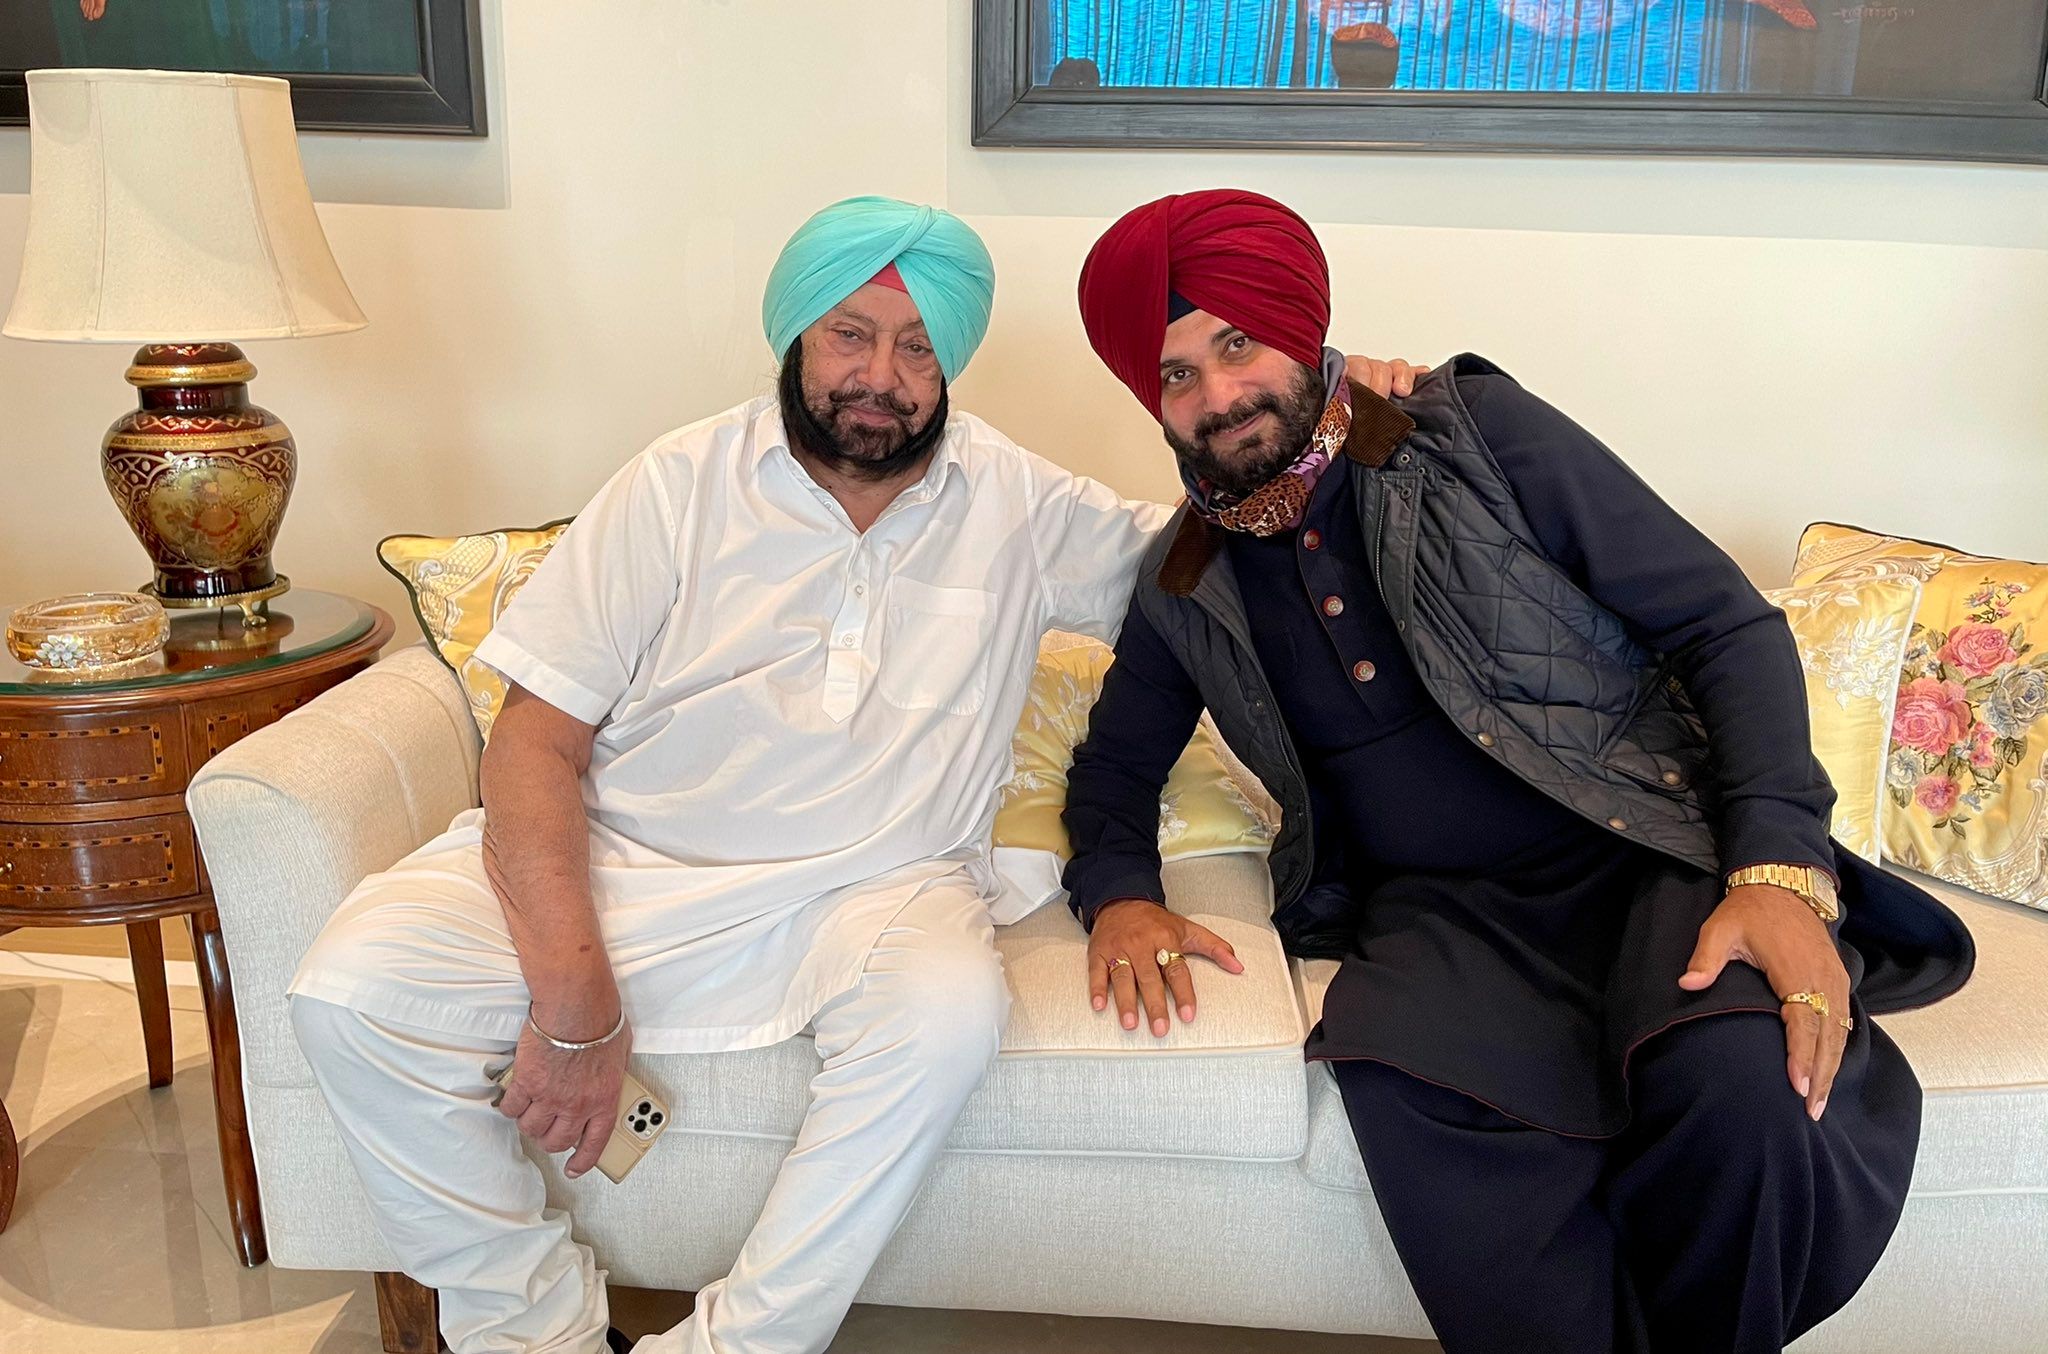 Not a stable man: Amarinder Singh on Navjot Sidhu after he resigns as Punjab Congress chief